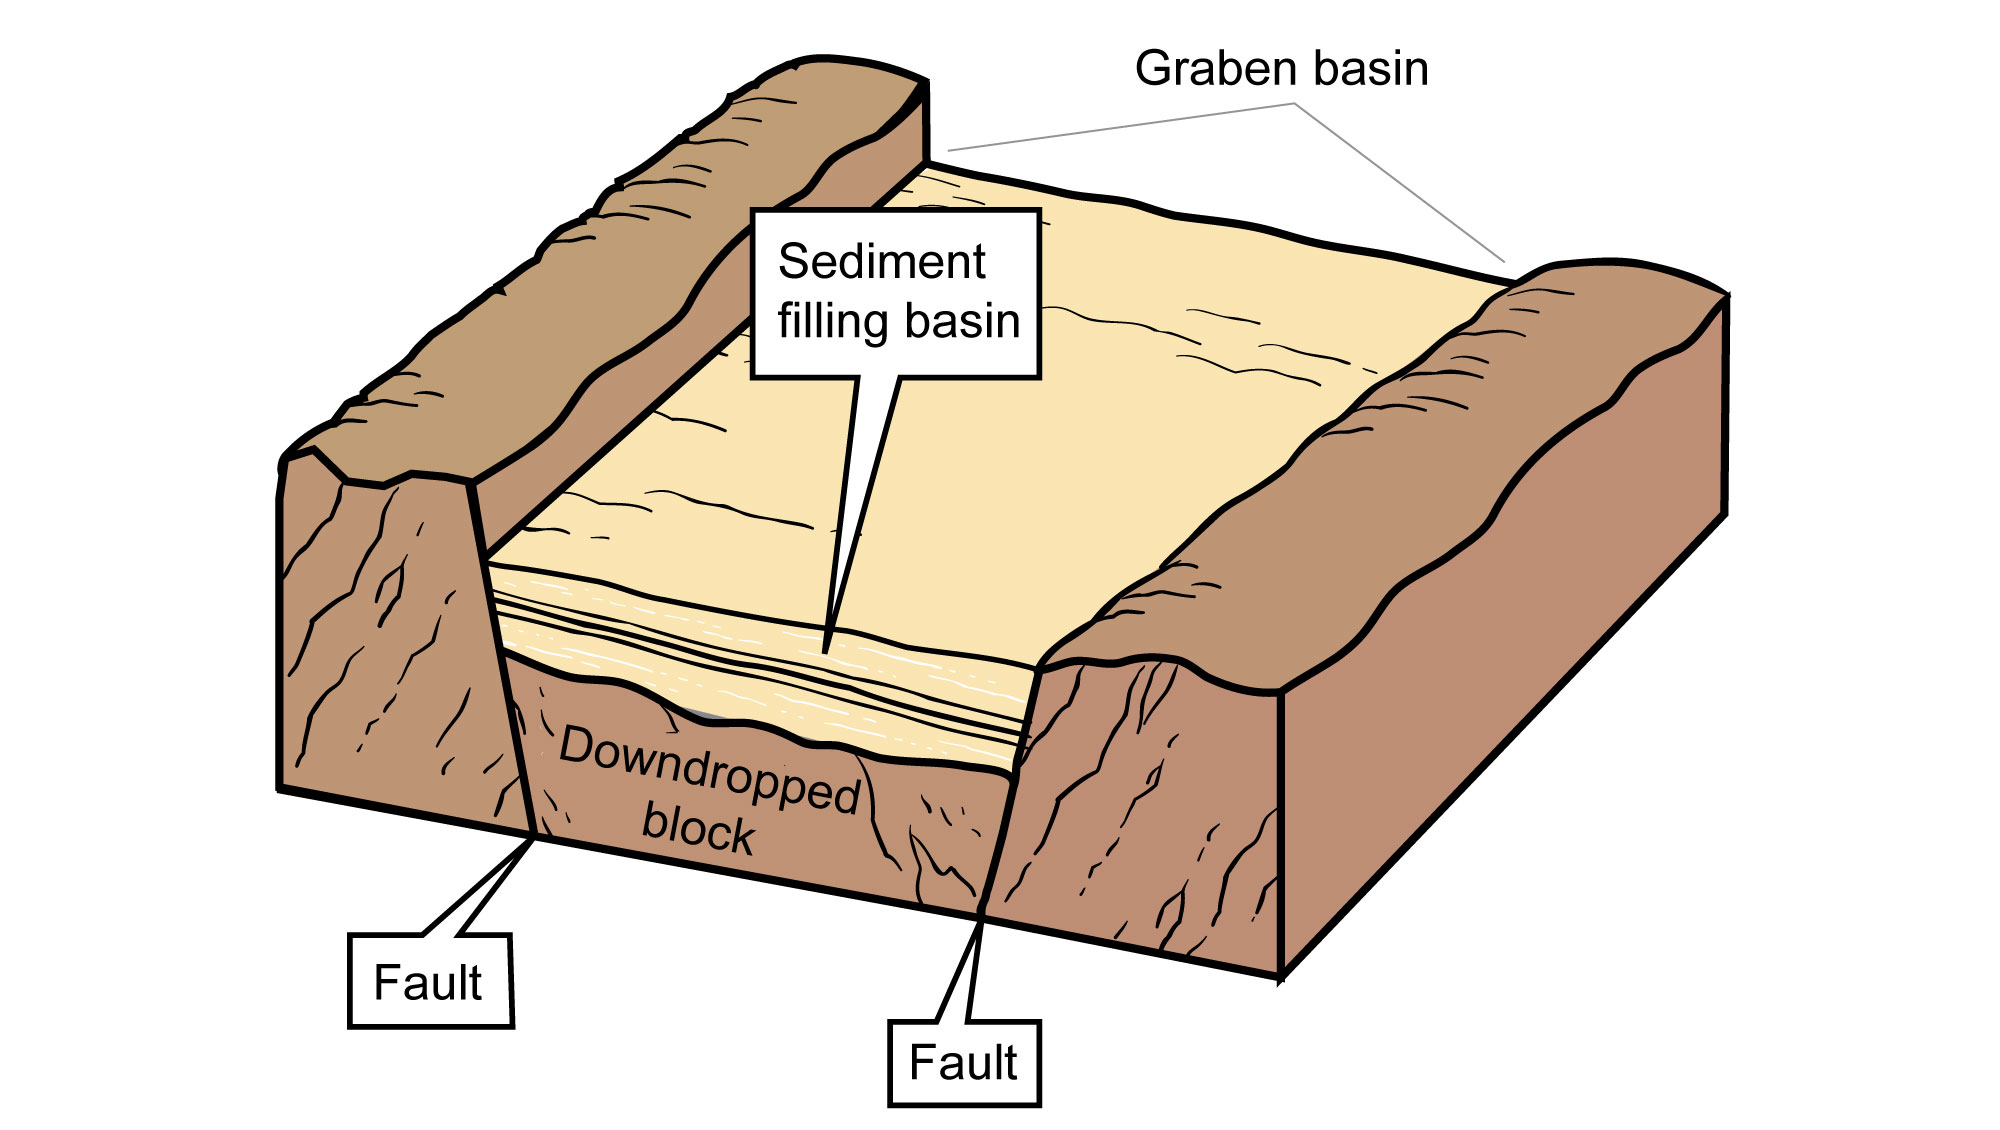 Simple illustration of a graben basin that has filled with sediment.